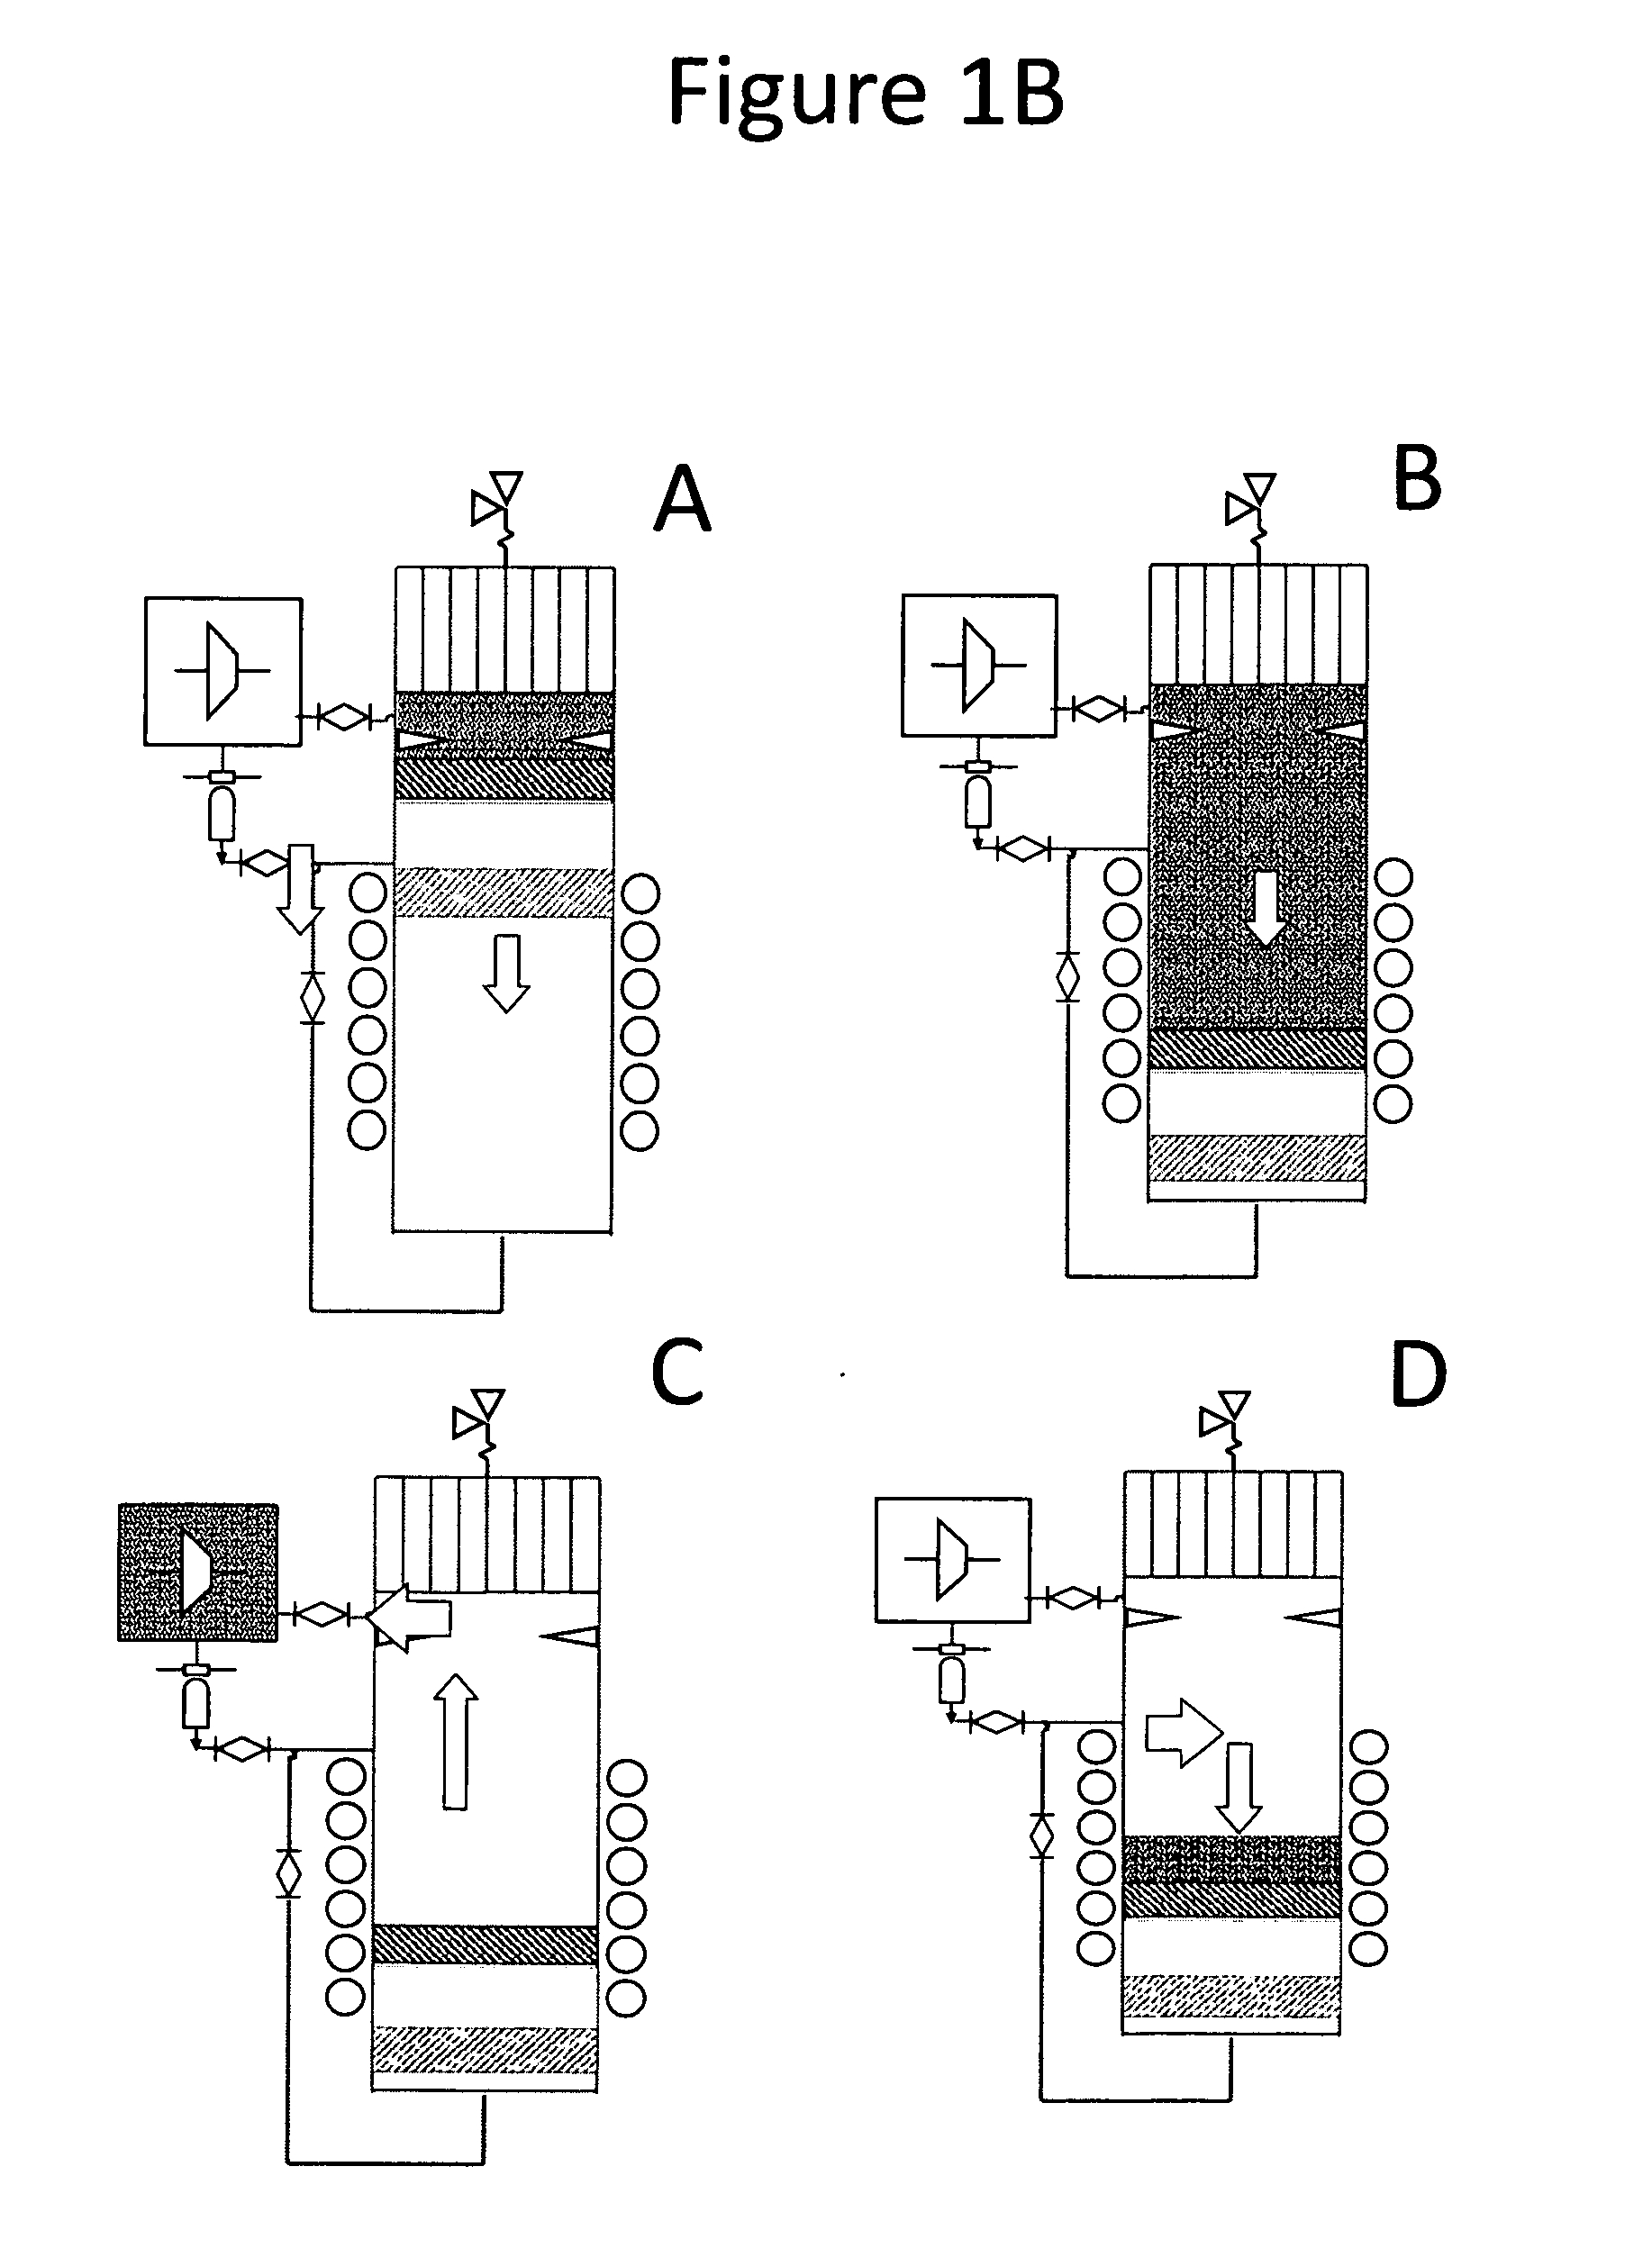 Methods of pulsed nuclear energy generation using piston-based systems